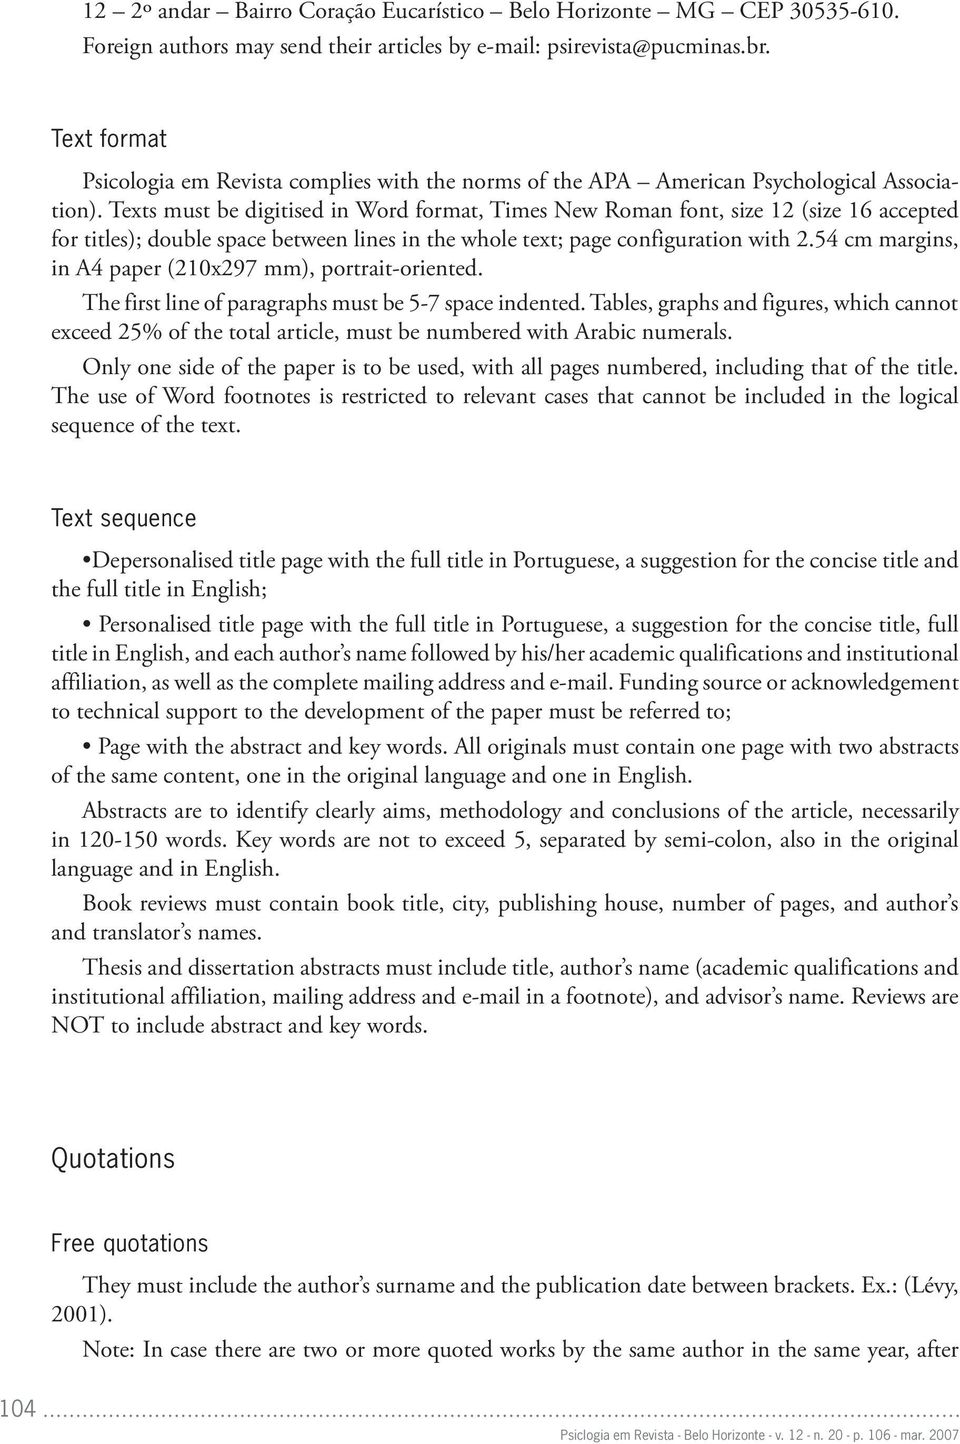 Texts must be digitised in Word format, Times New Roman font, size 12 (size 16 accepted for titles); double space between lines in the whole text; page configuration with 2.